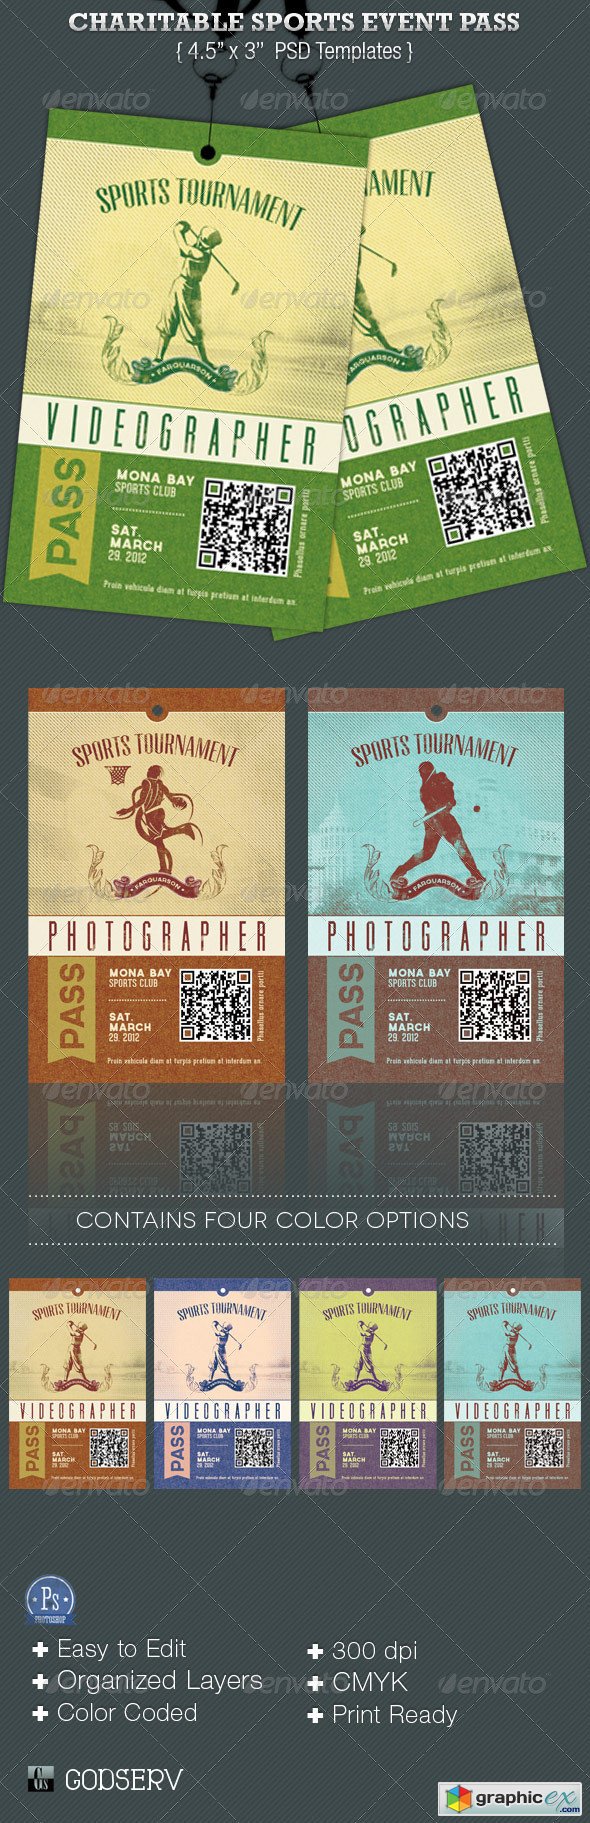 Charitable Sports Event Pass Template